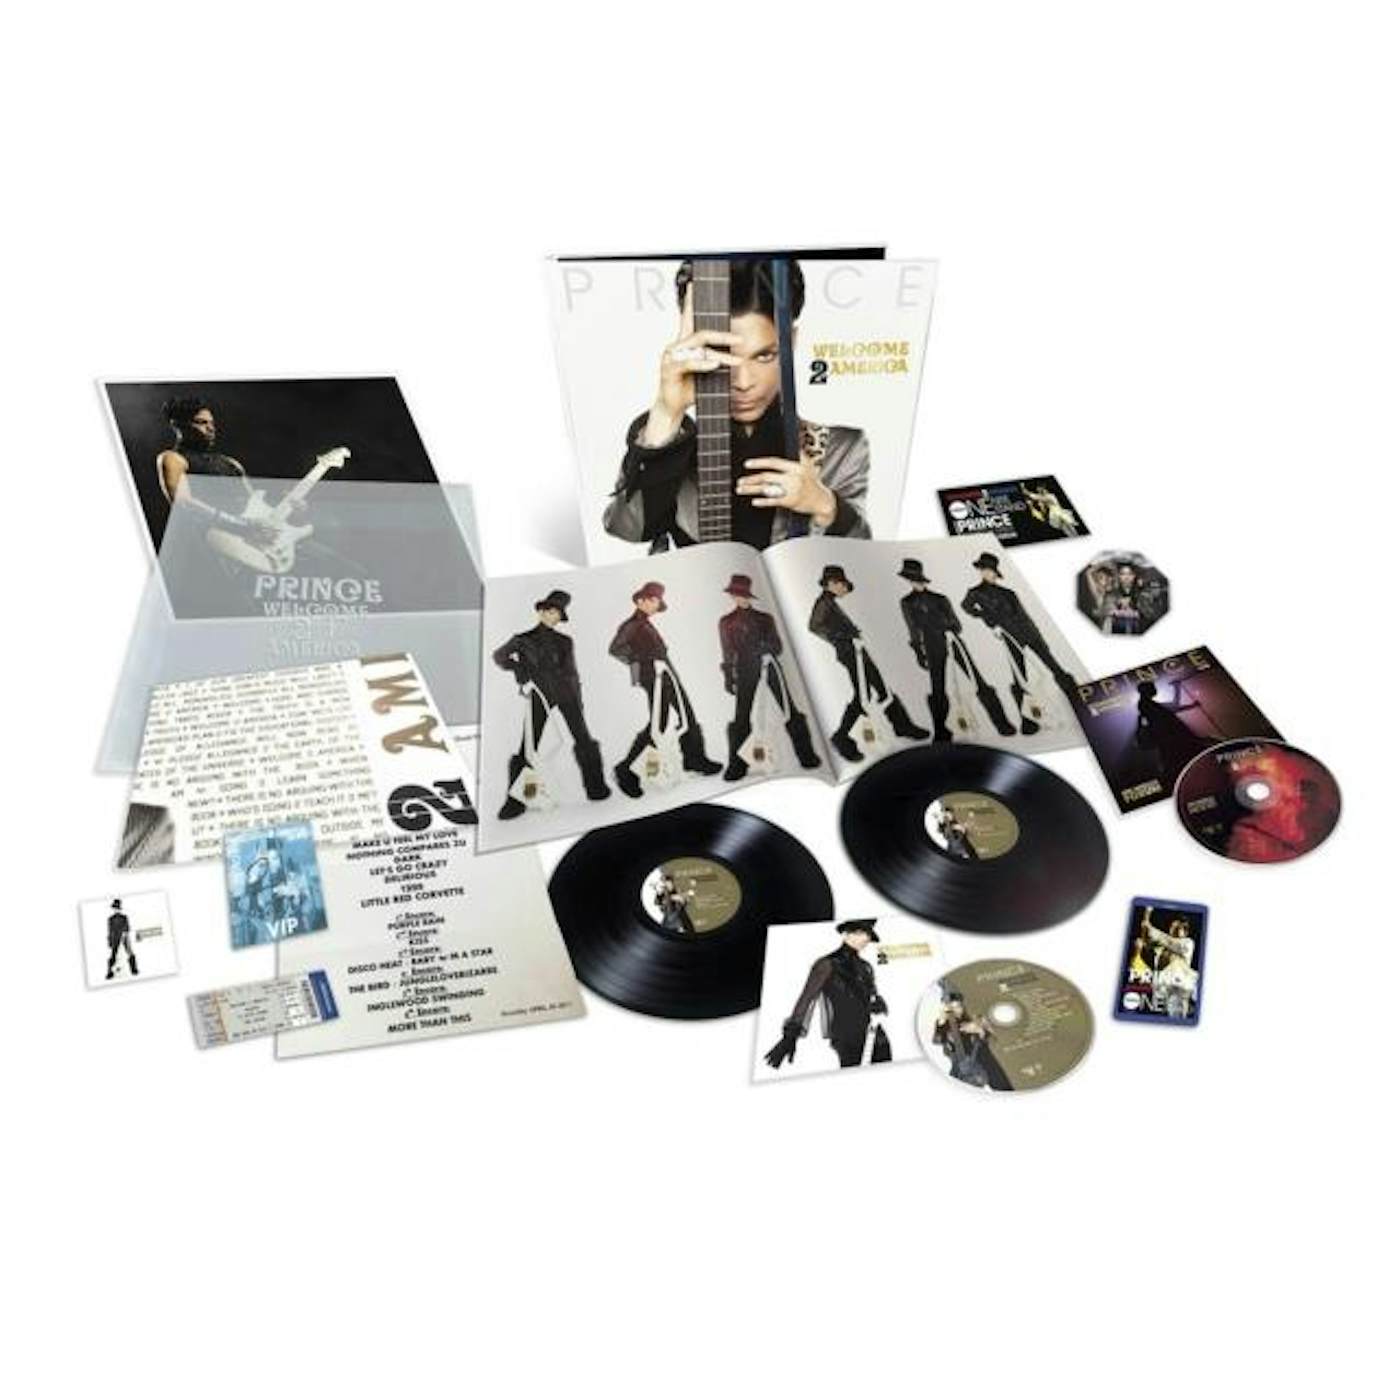 Prince "Welcome 2 America" Deluxe Edition 2xLP + CD + Blu-Ray (Vinyl)